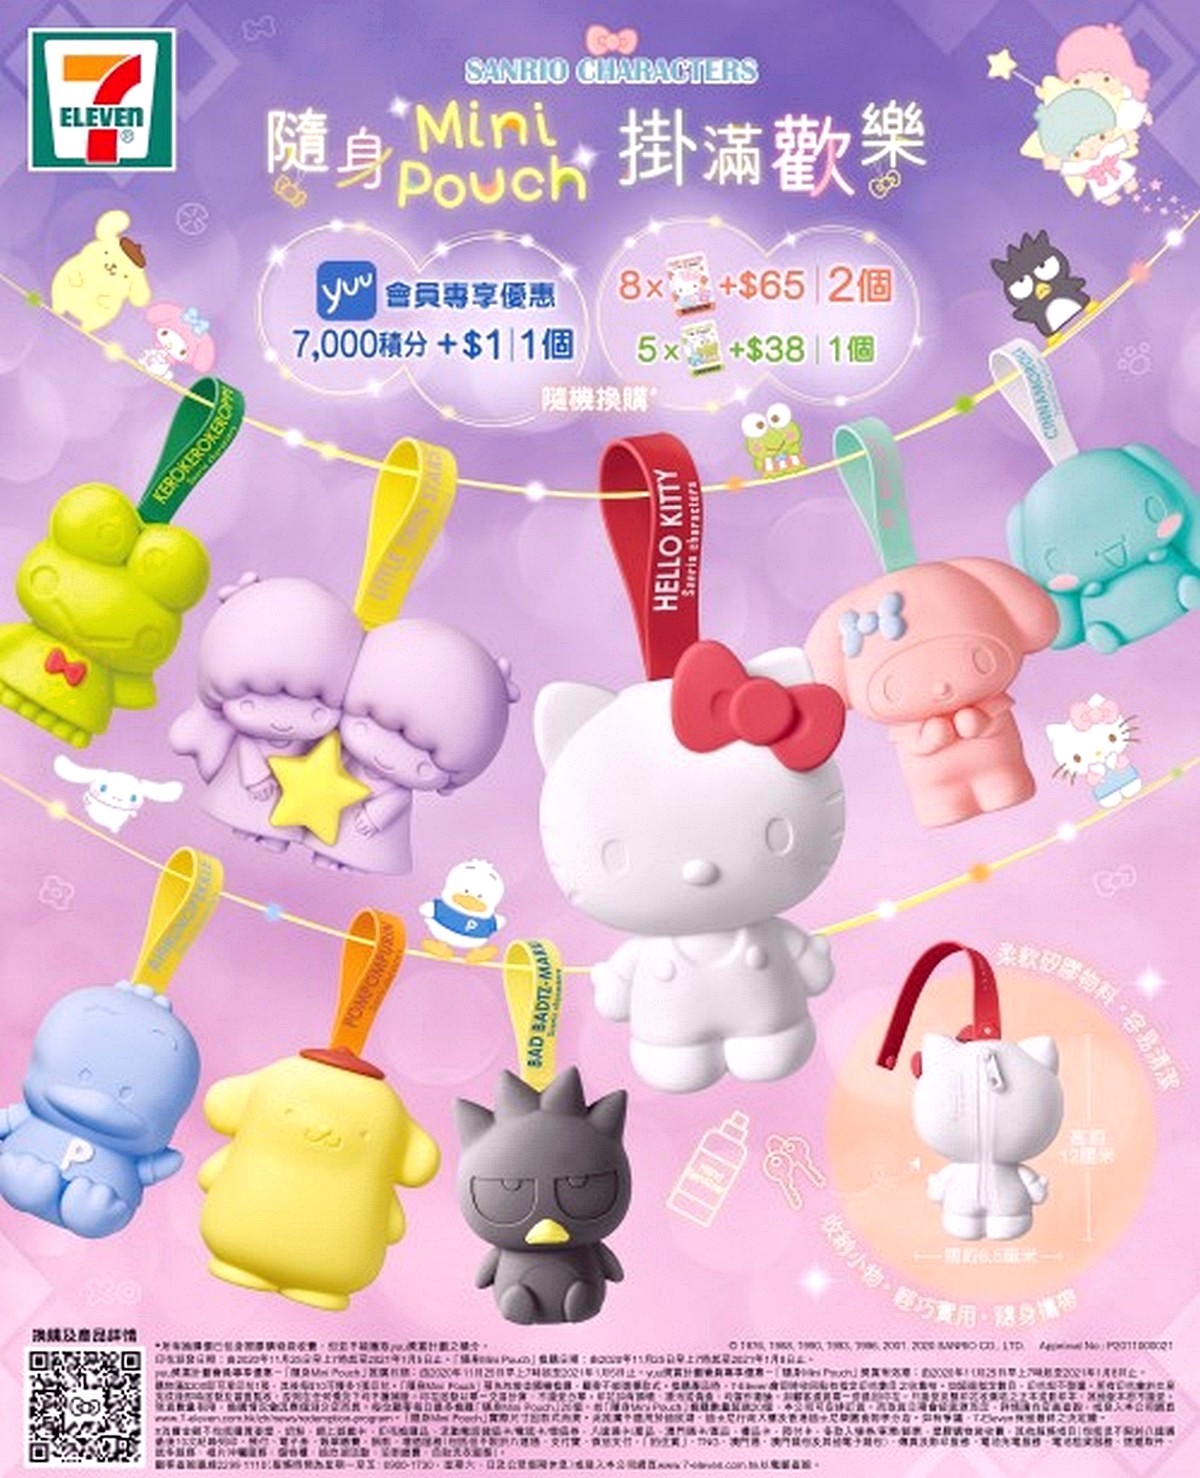 Sanrio-Character-designs-Sanrio-Silicone-Mini-Pouch-Singapore-7-Eleven-Promotion-2021-June-9th-Launching-Date 9 Jun-10 Aug 2021: Redeem & Collect All 8 Famous Sanrio Characters Silicone Mini Pouches at 7 Eleven Singapore Islandwide! Featuring Hello Kitty, My Melody & More!